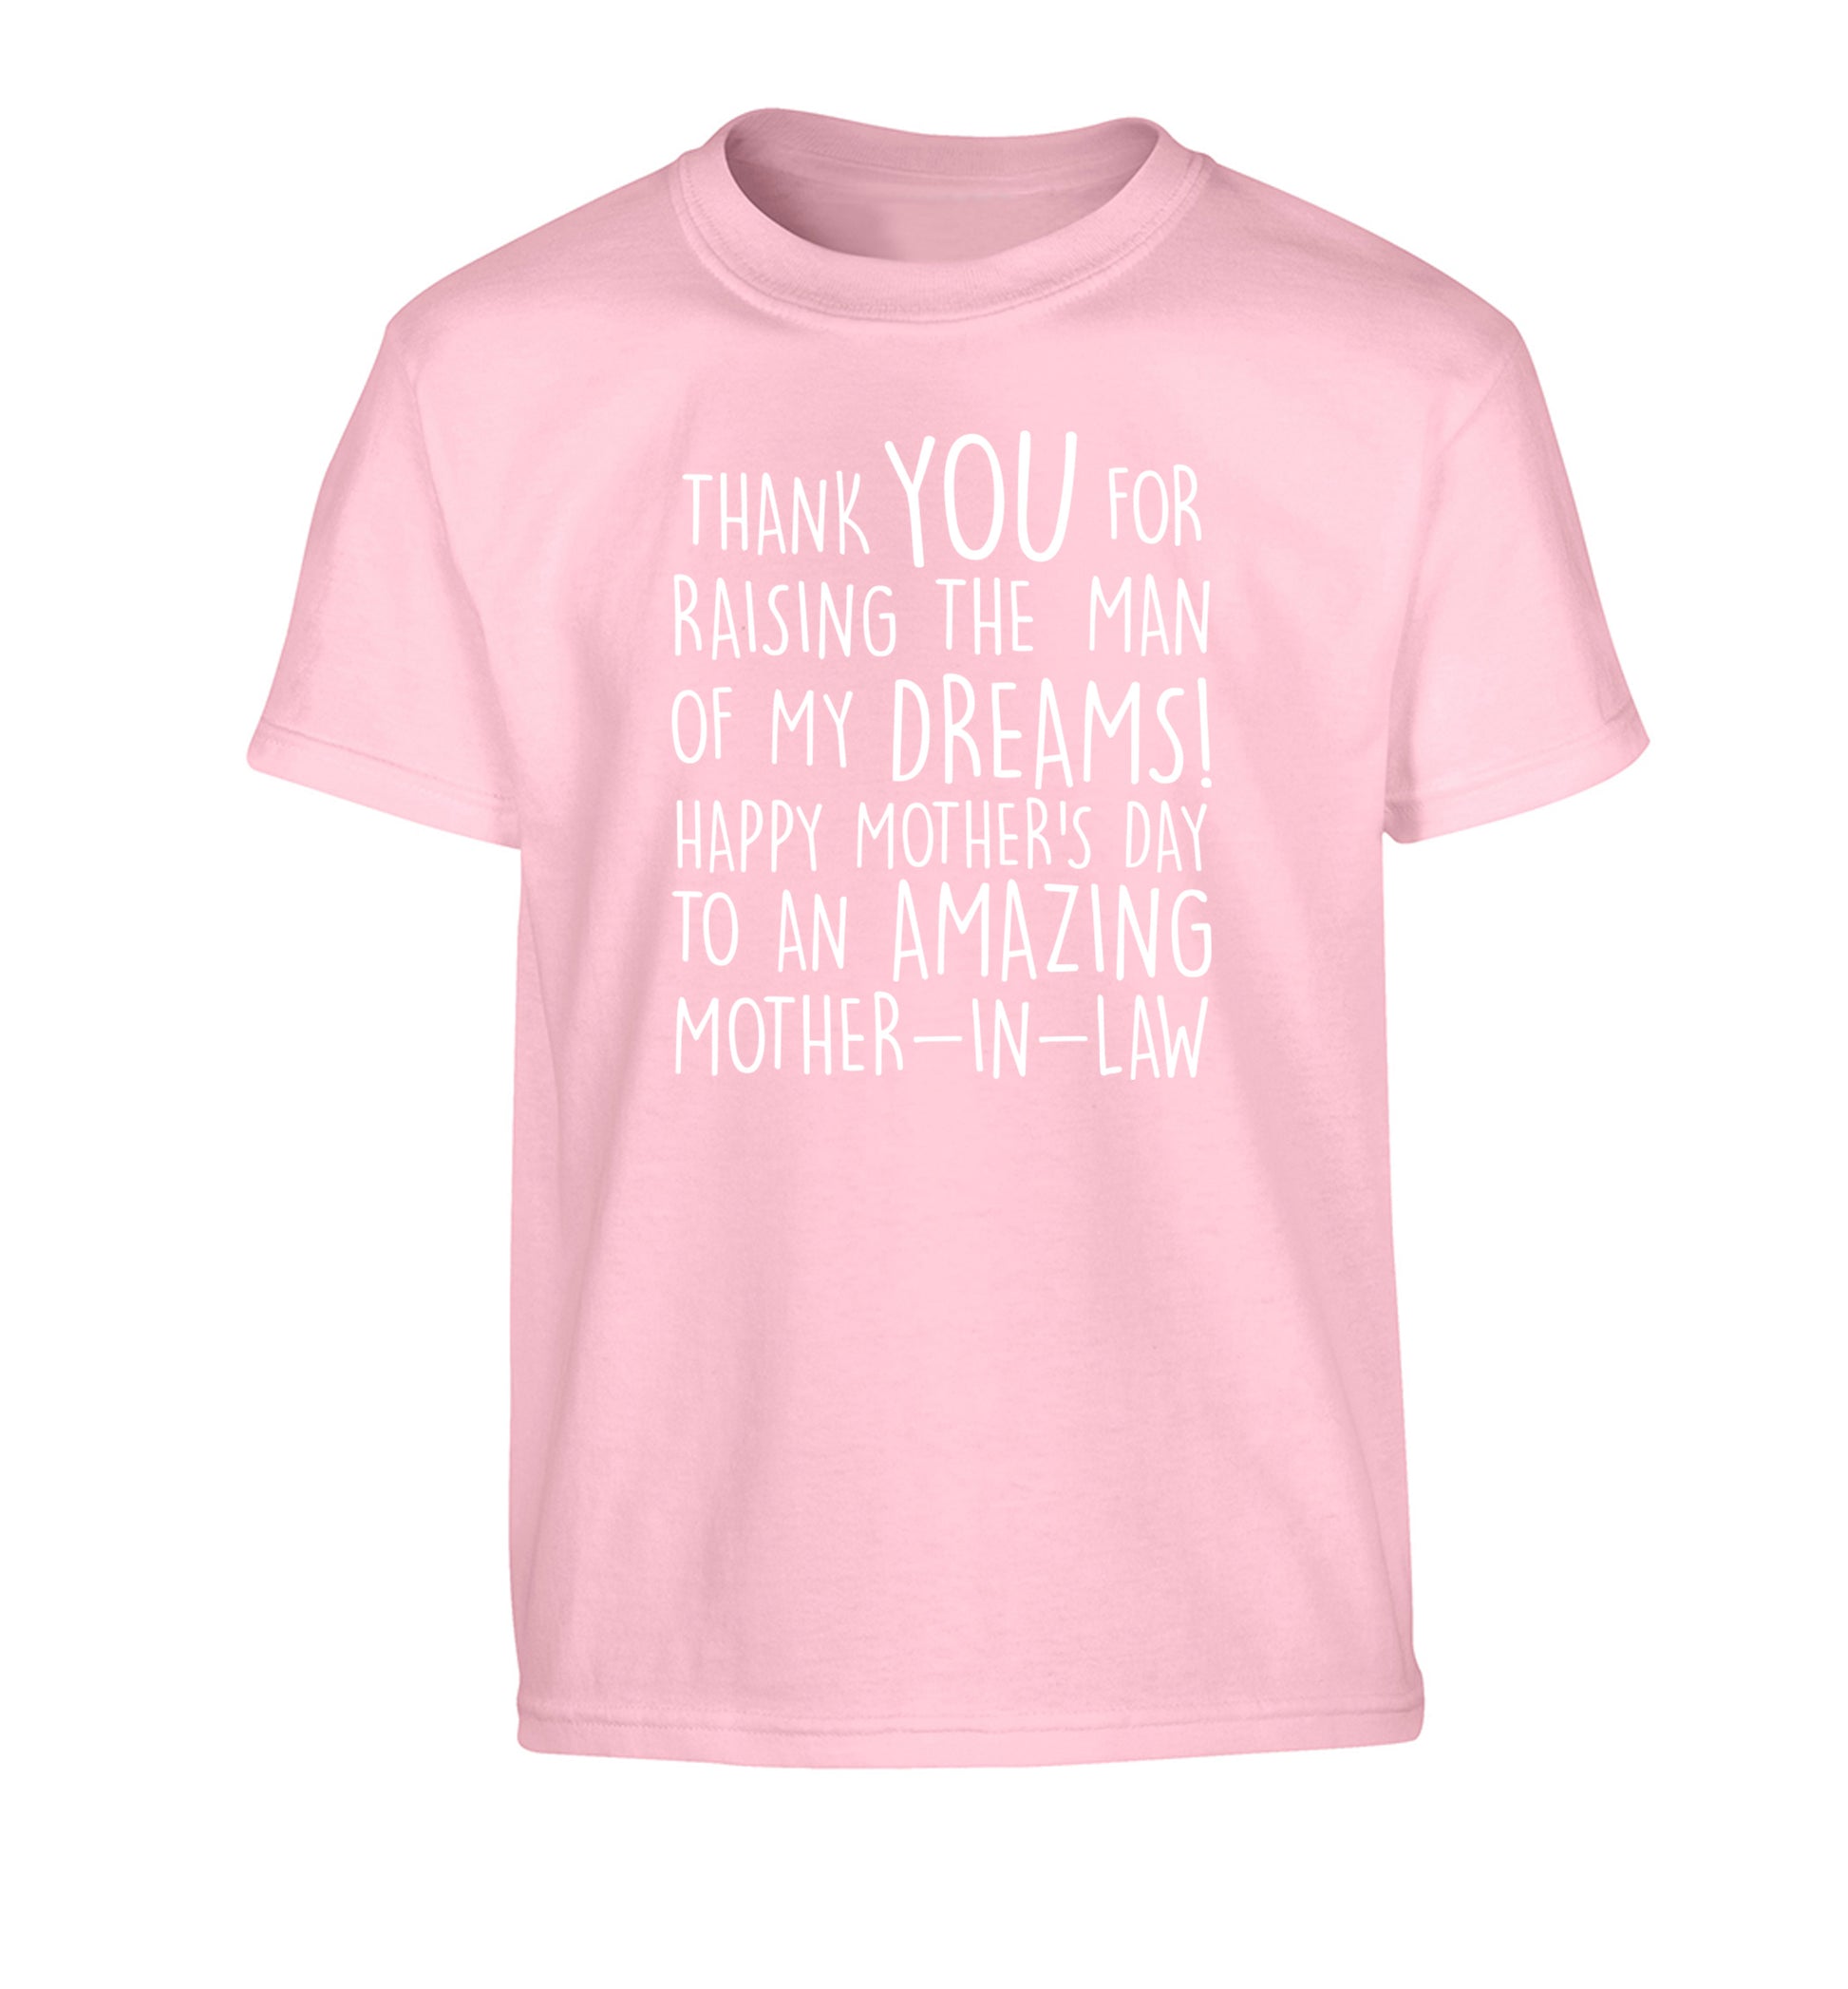 Thank you for raising the man of my dreams happy mother's day mother-in-law Children's light pink Tshirt 12-13 Years